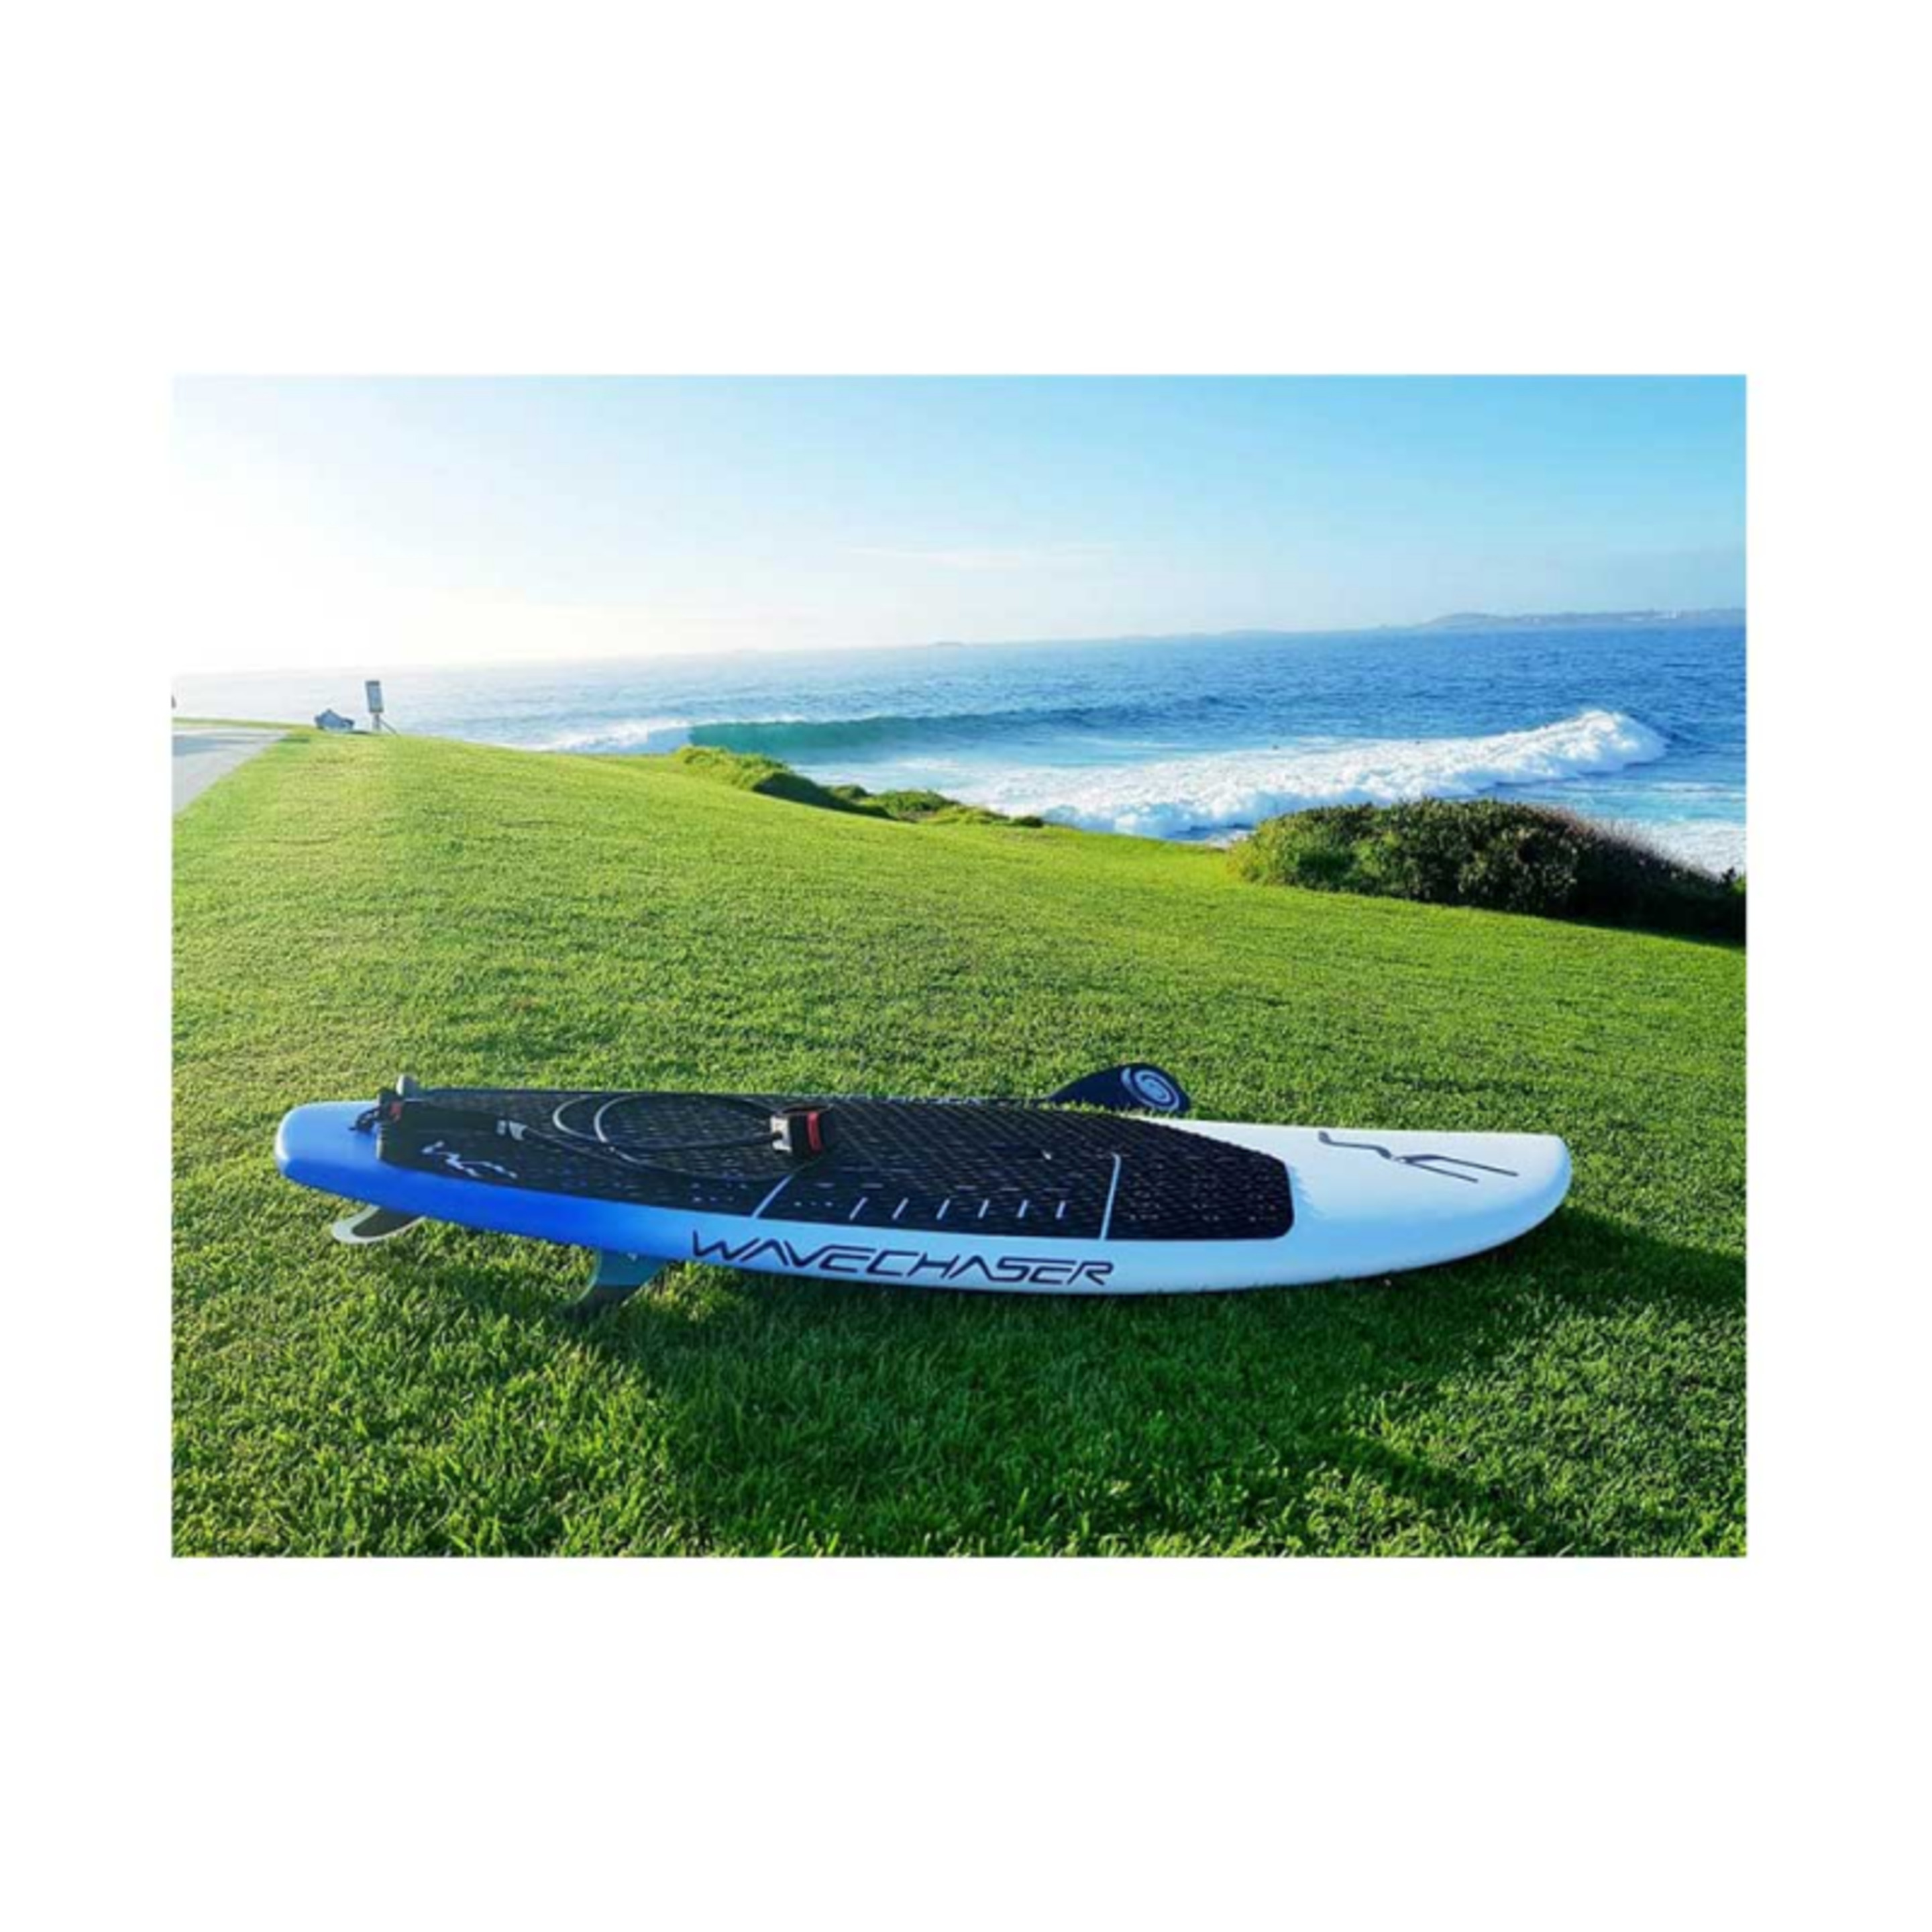 Tabla Paddle Surf Wave Chaser 280 (9'2) Gts2 Performance